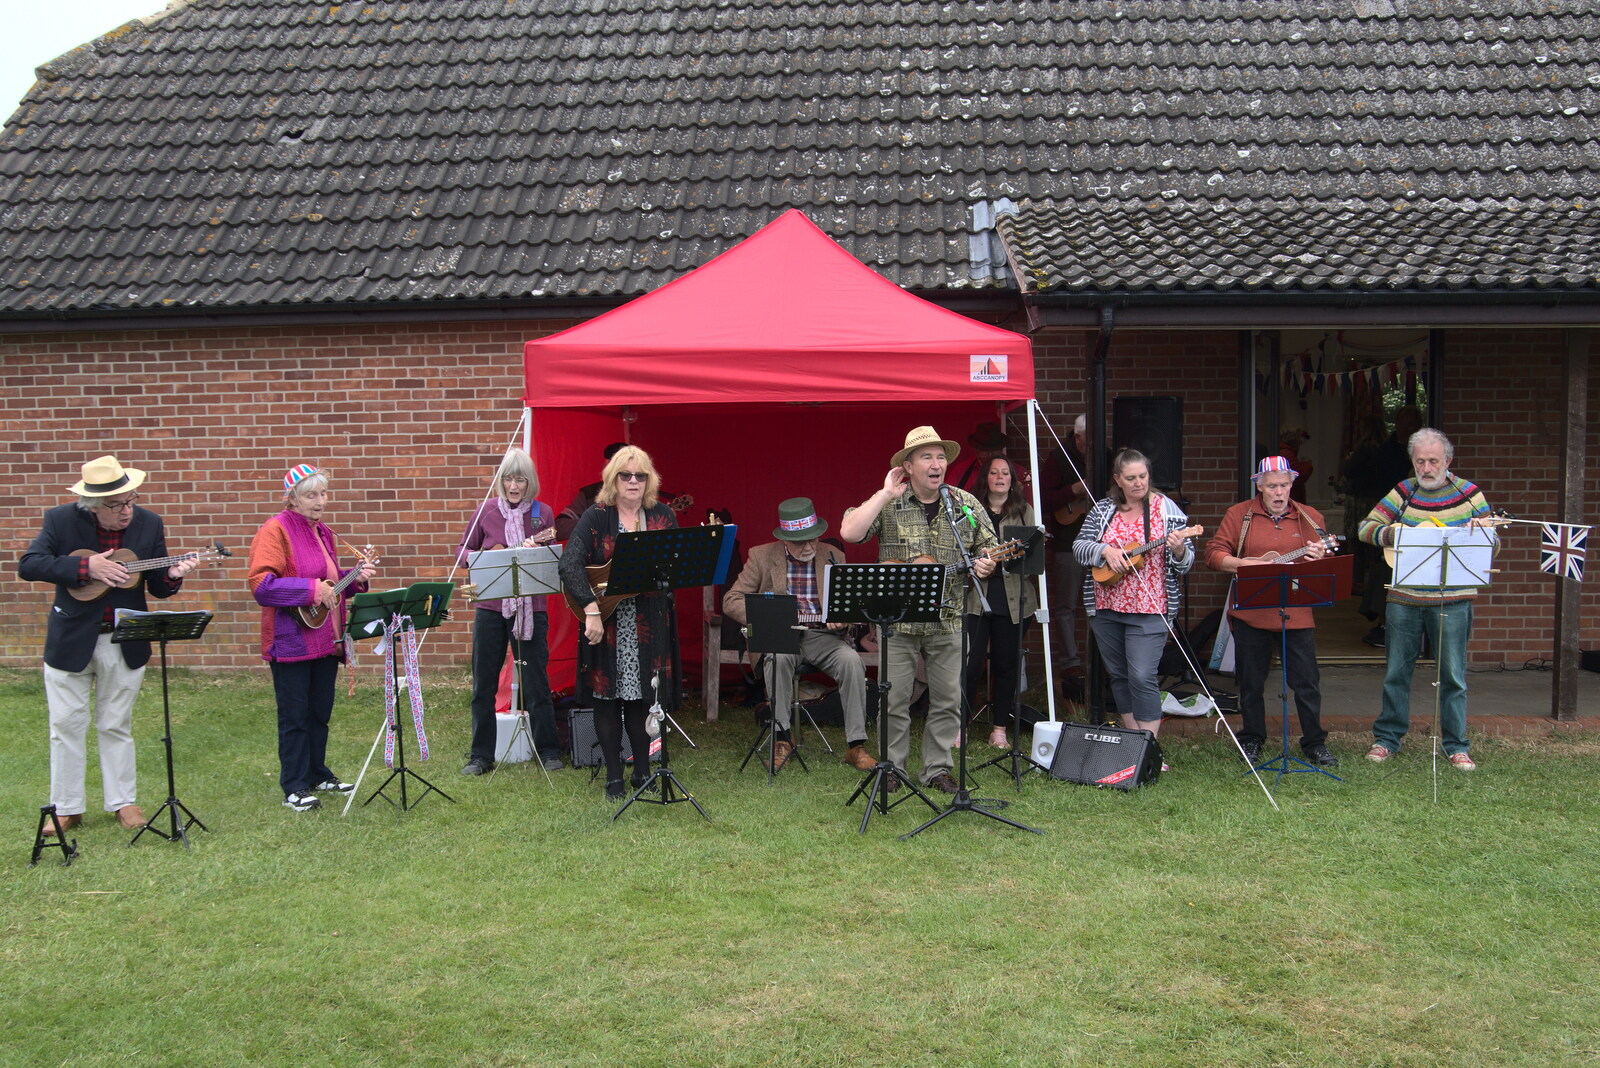 Platinum Jubilee Sunday in Palgrave, Brome and Coney Weston - 5th June 2022: A ukulele group does a performance